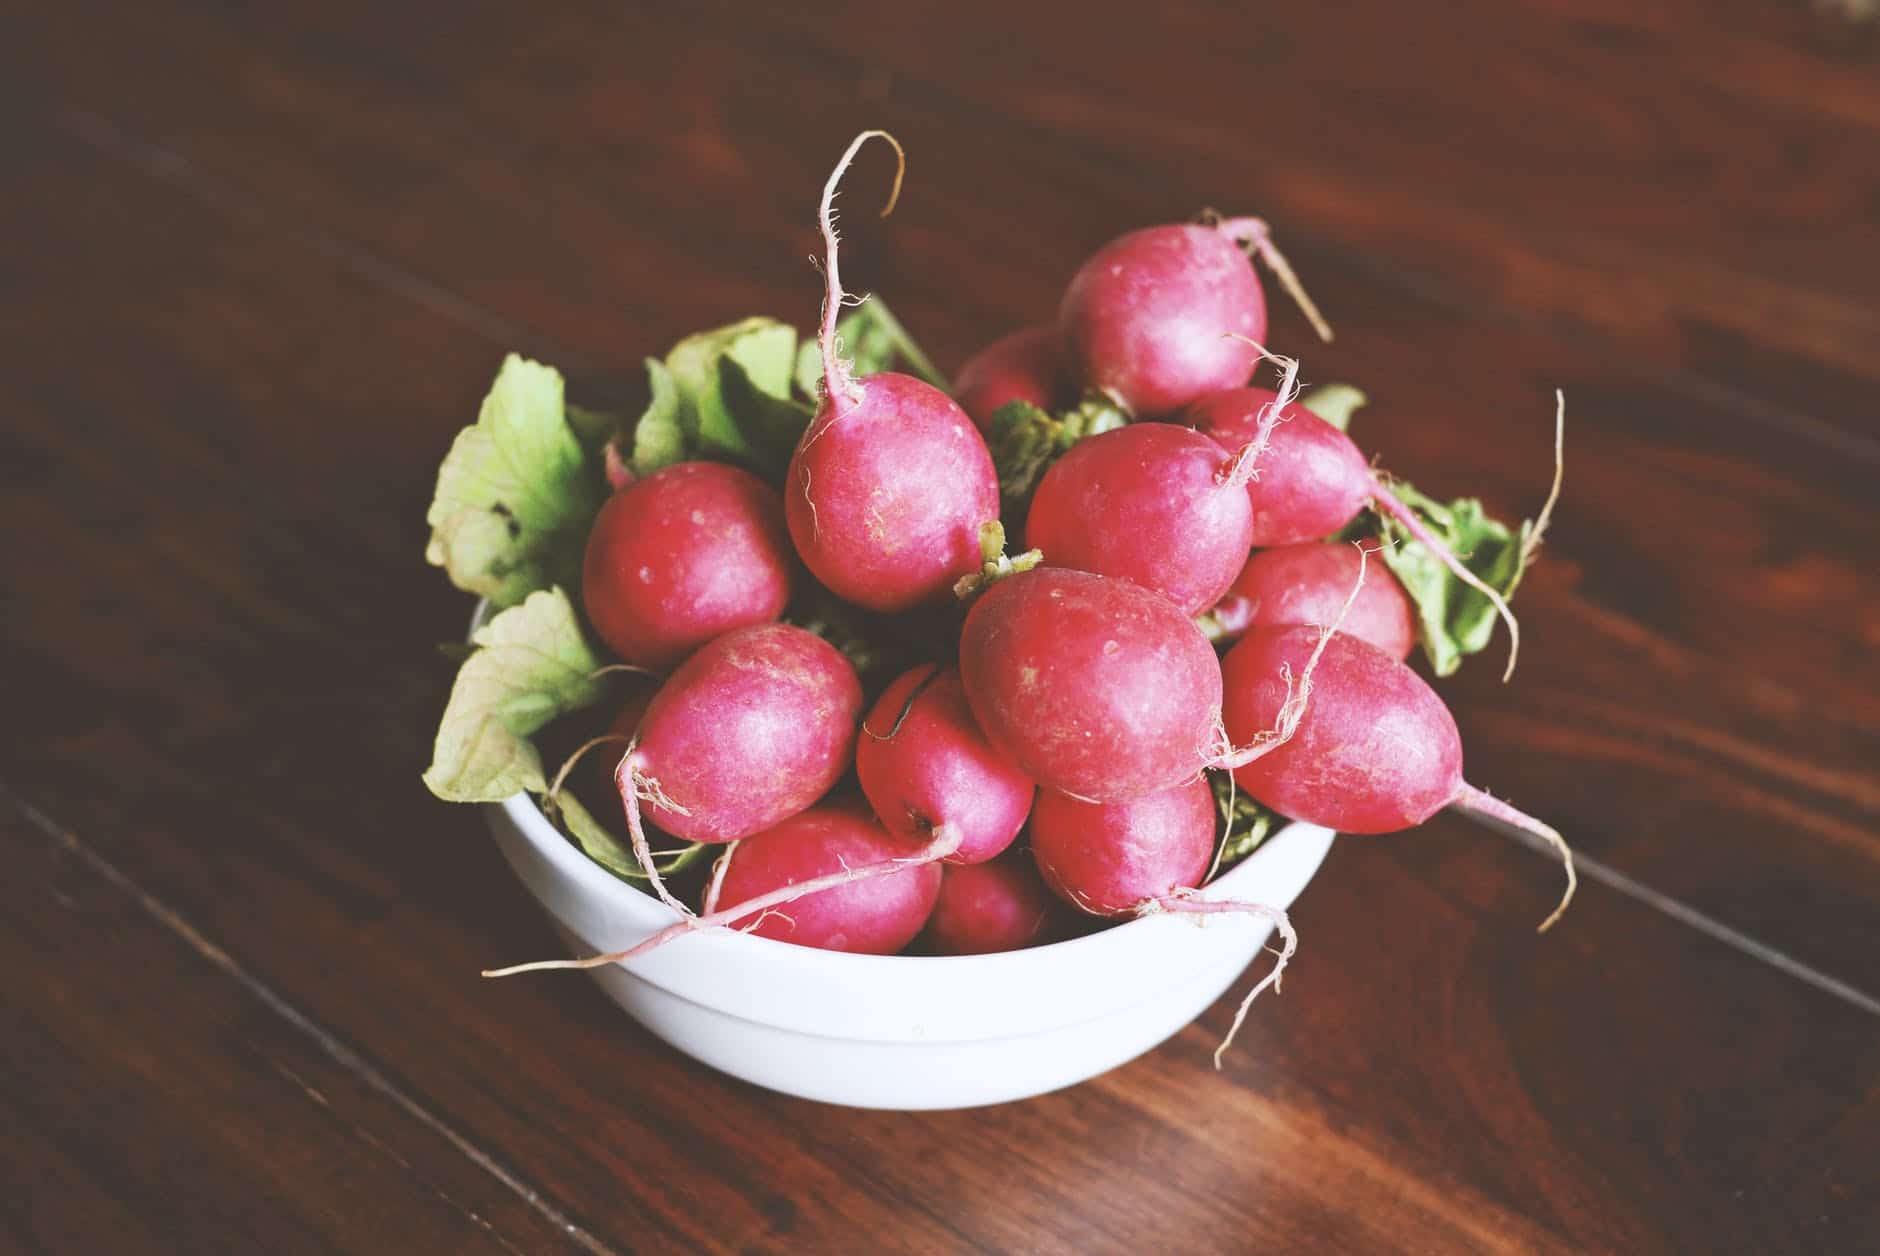 how to store radishes